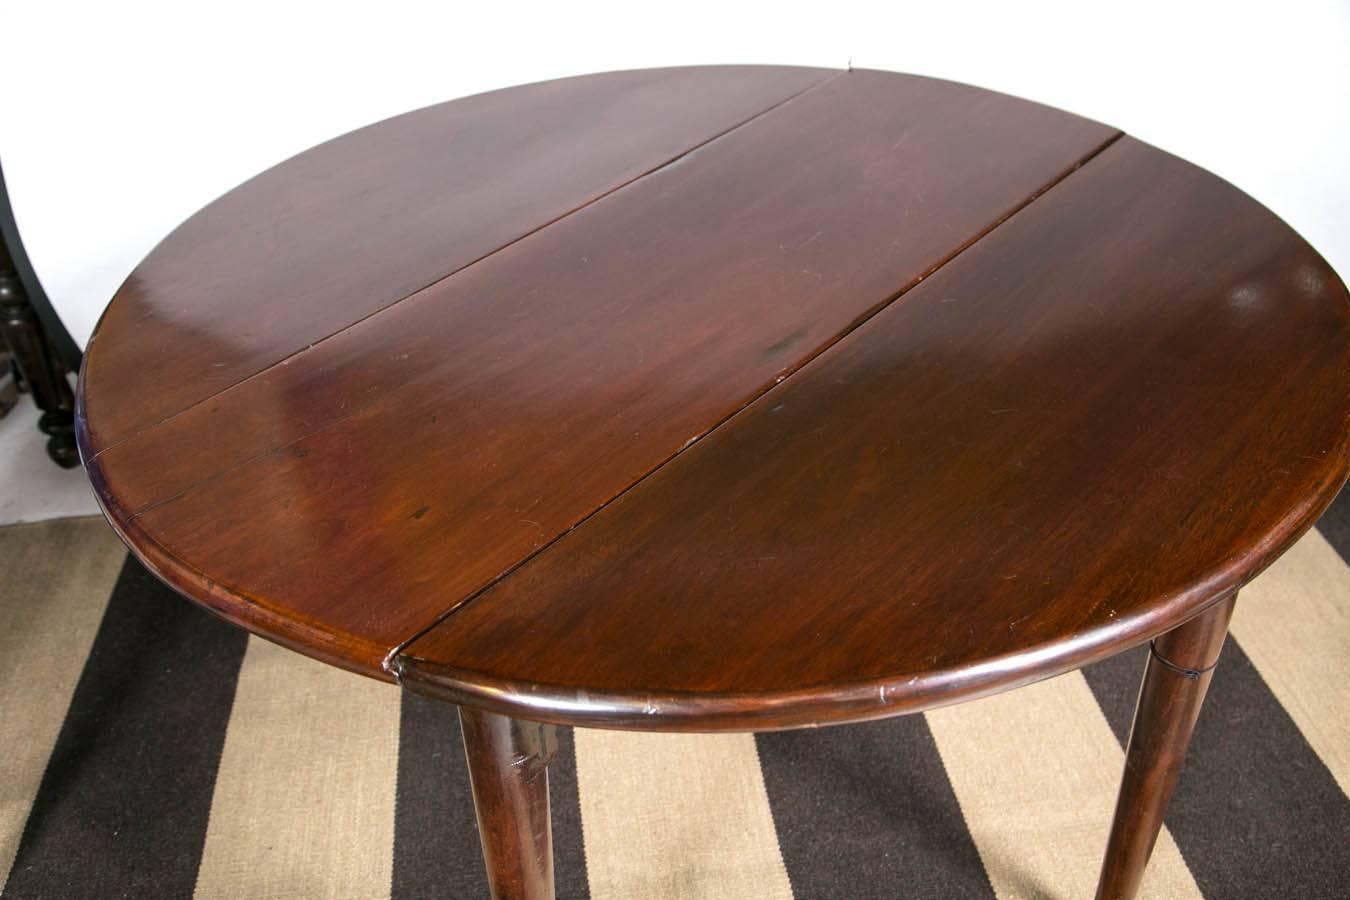 a fabulous English drop leaf table great color and shape look at those legs!